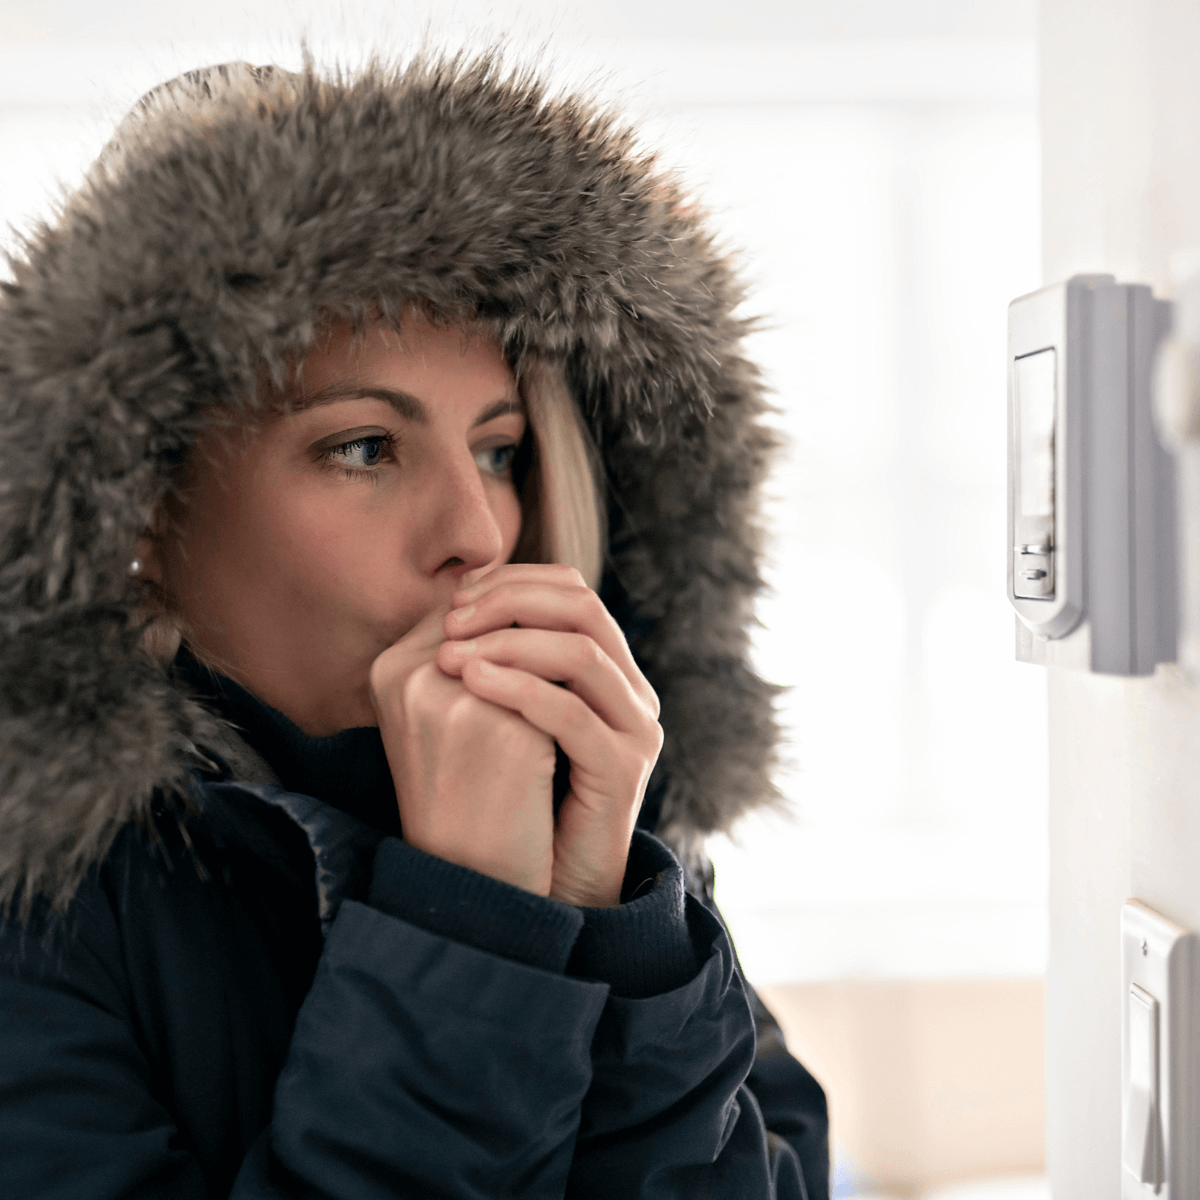 Arpi's can help with common furnace problems